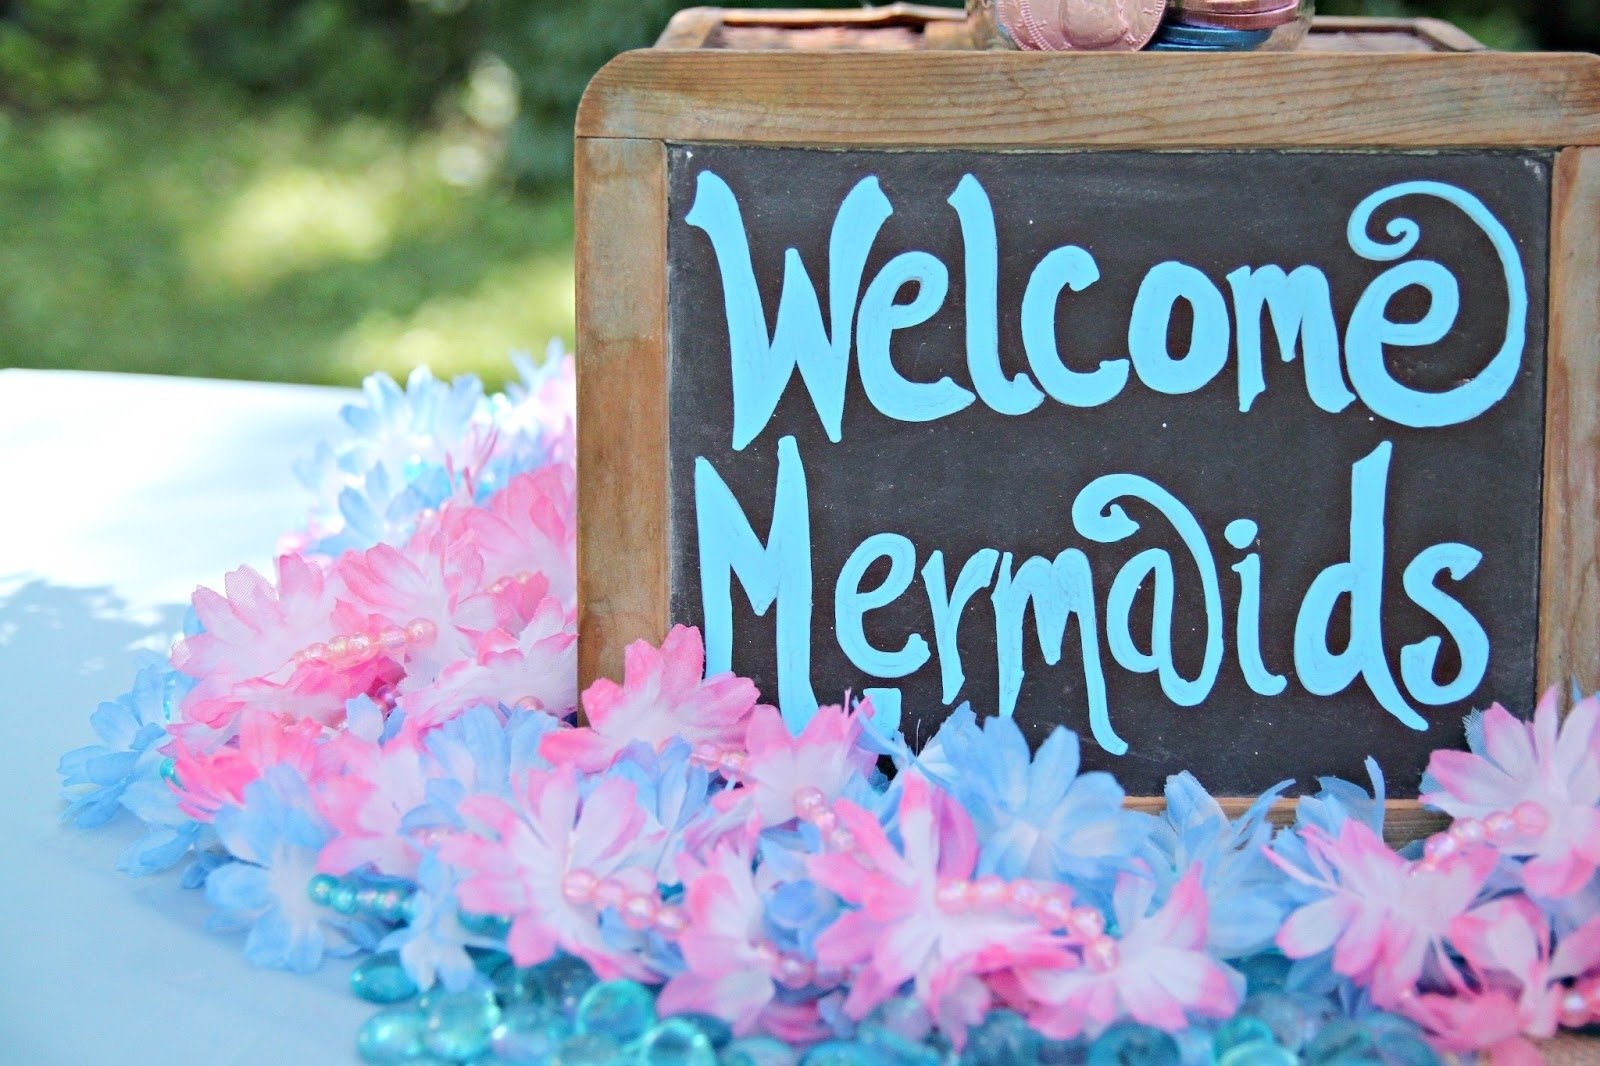 10 Most Recommended The Little Mermaid Party Ideas 14 awesome little mermaid birthday party ideas birthday inspire 3 2023